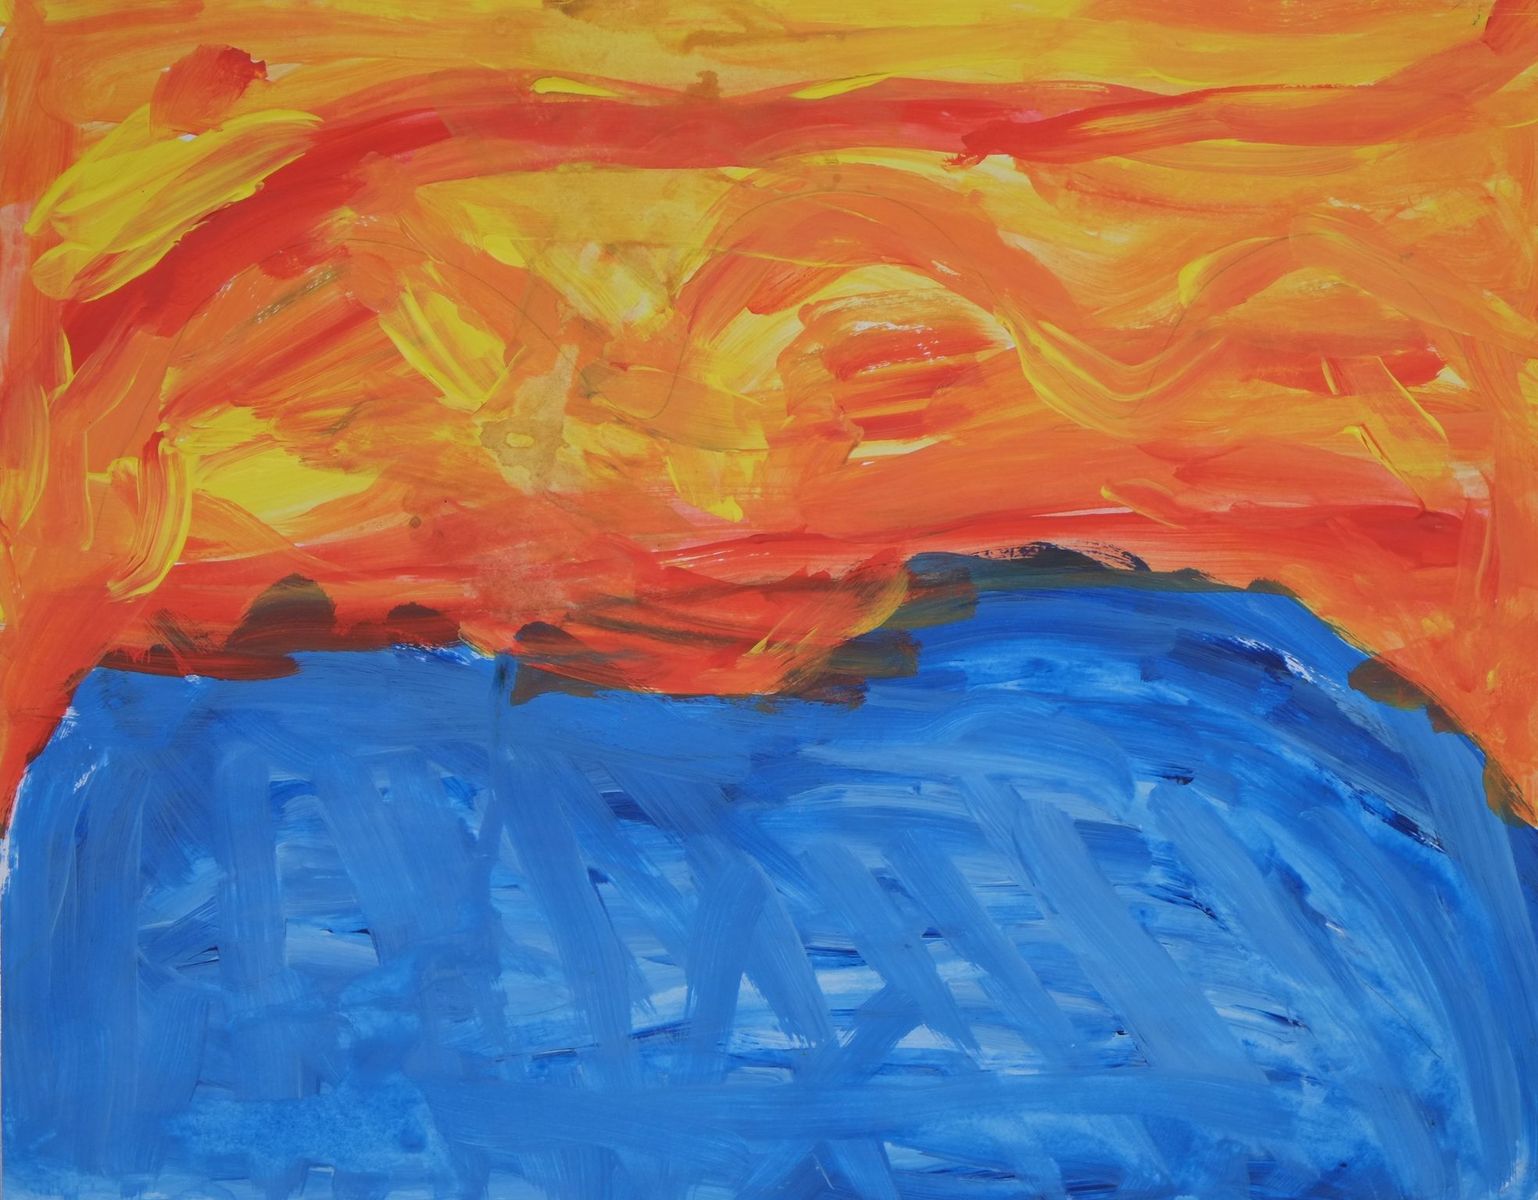 Acrylic on paper artwork depicting a sunset over a bond.  Fiery red, orange and yellow paint strokes encompass the top half of the art while the bottom half is the blue pond